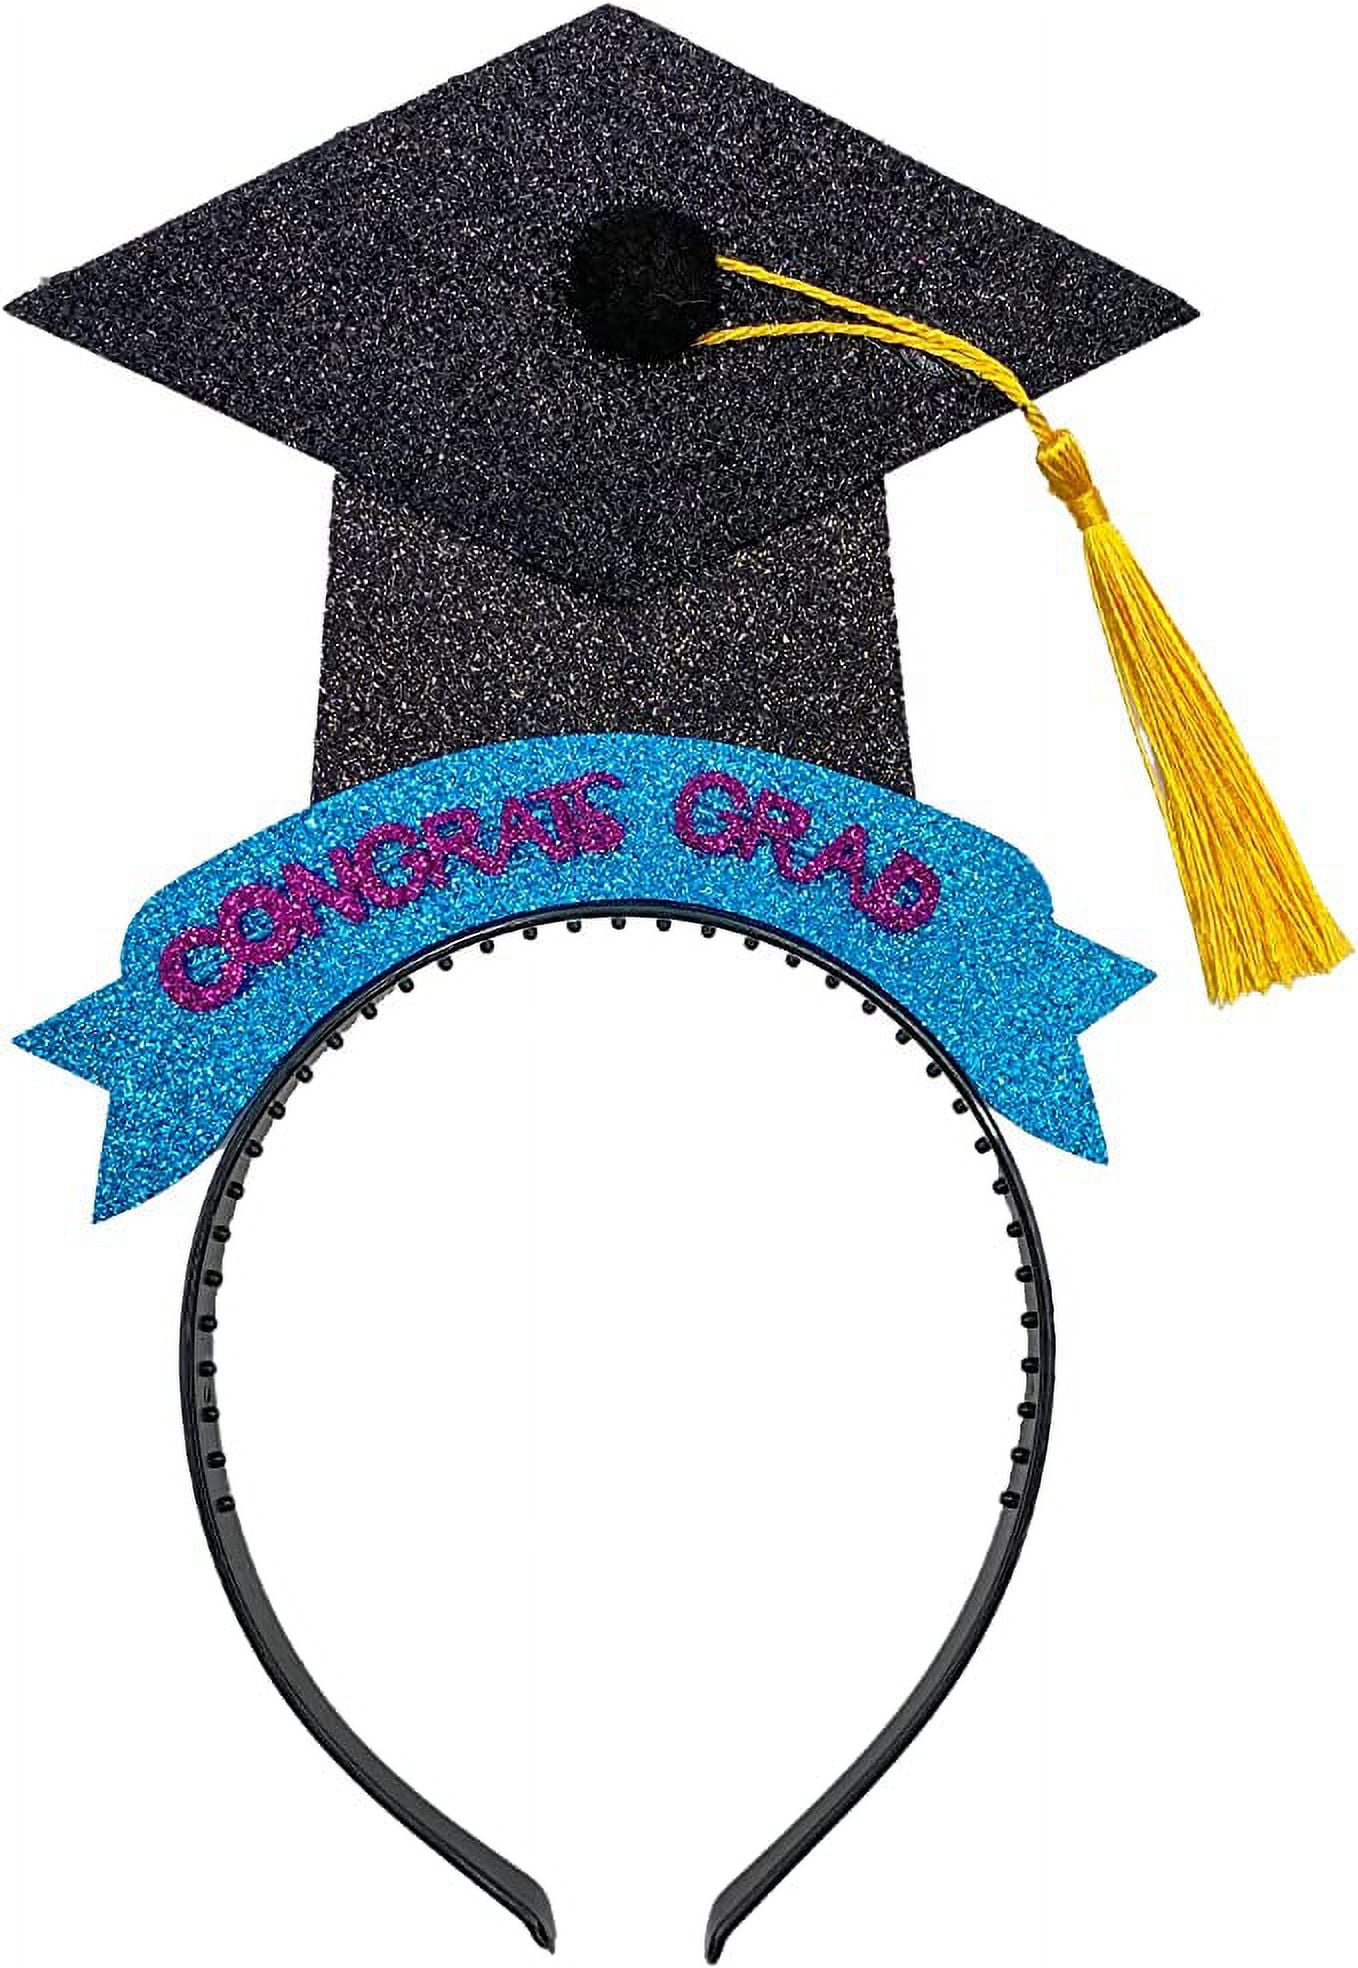 Graduation Caps with Tassels Graduation Ceremony Party Supplies Graduation  Hat Photo Props for Students (Yellow Tassels) 